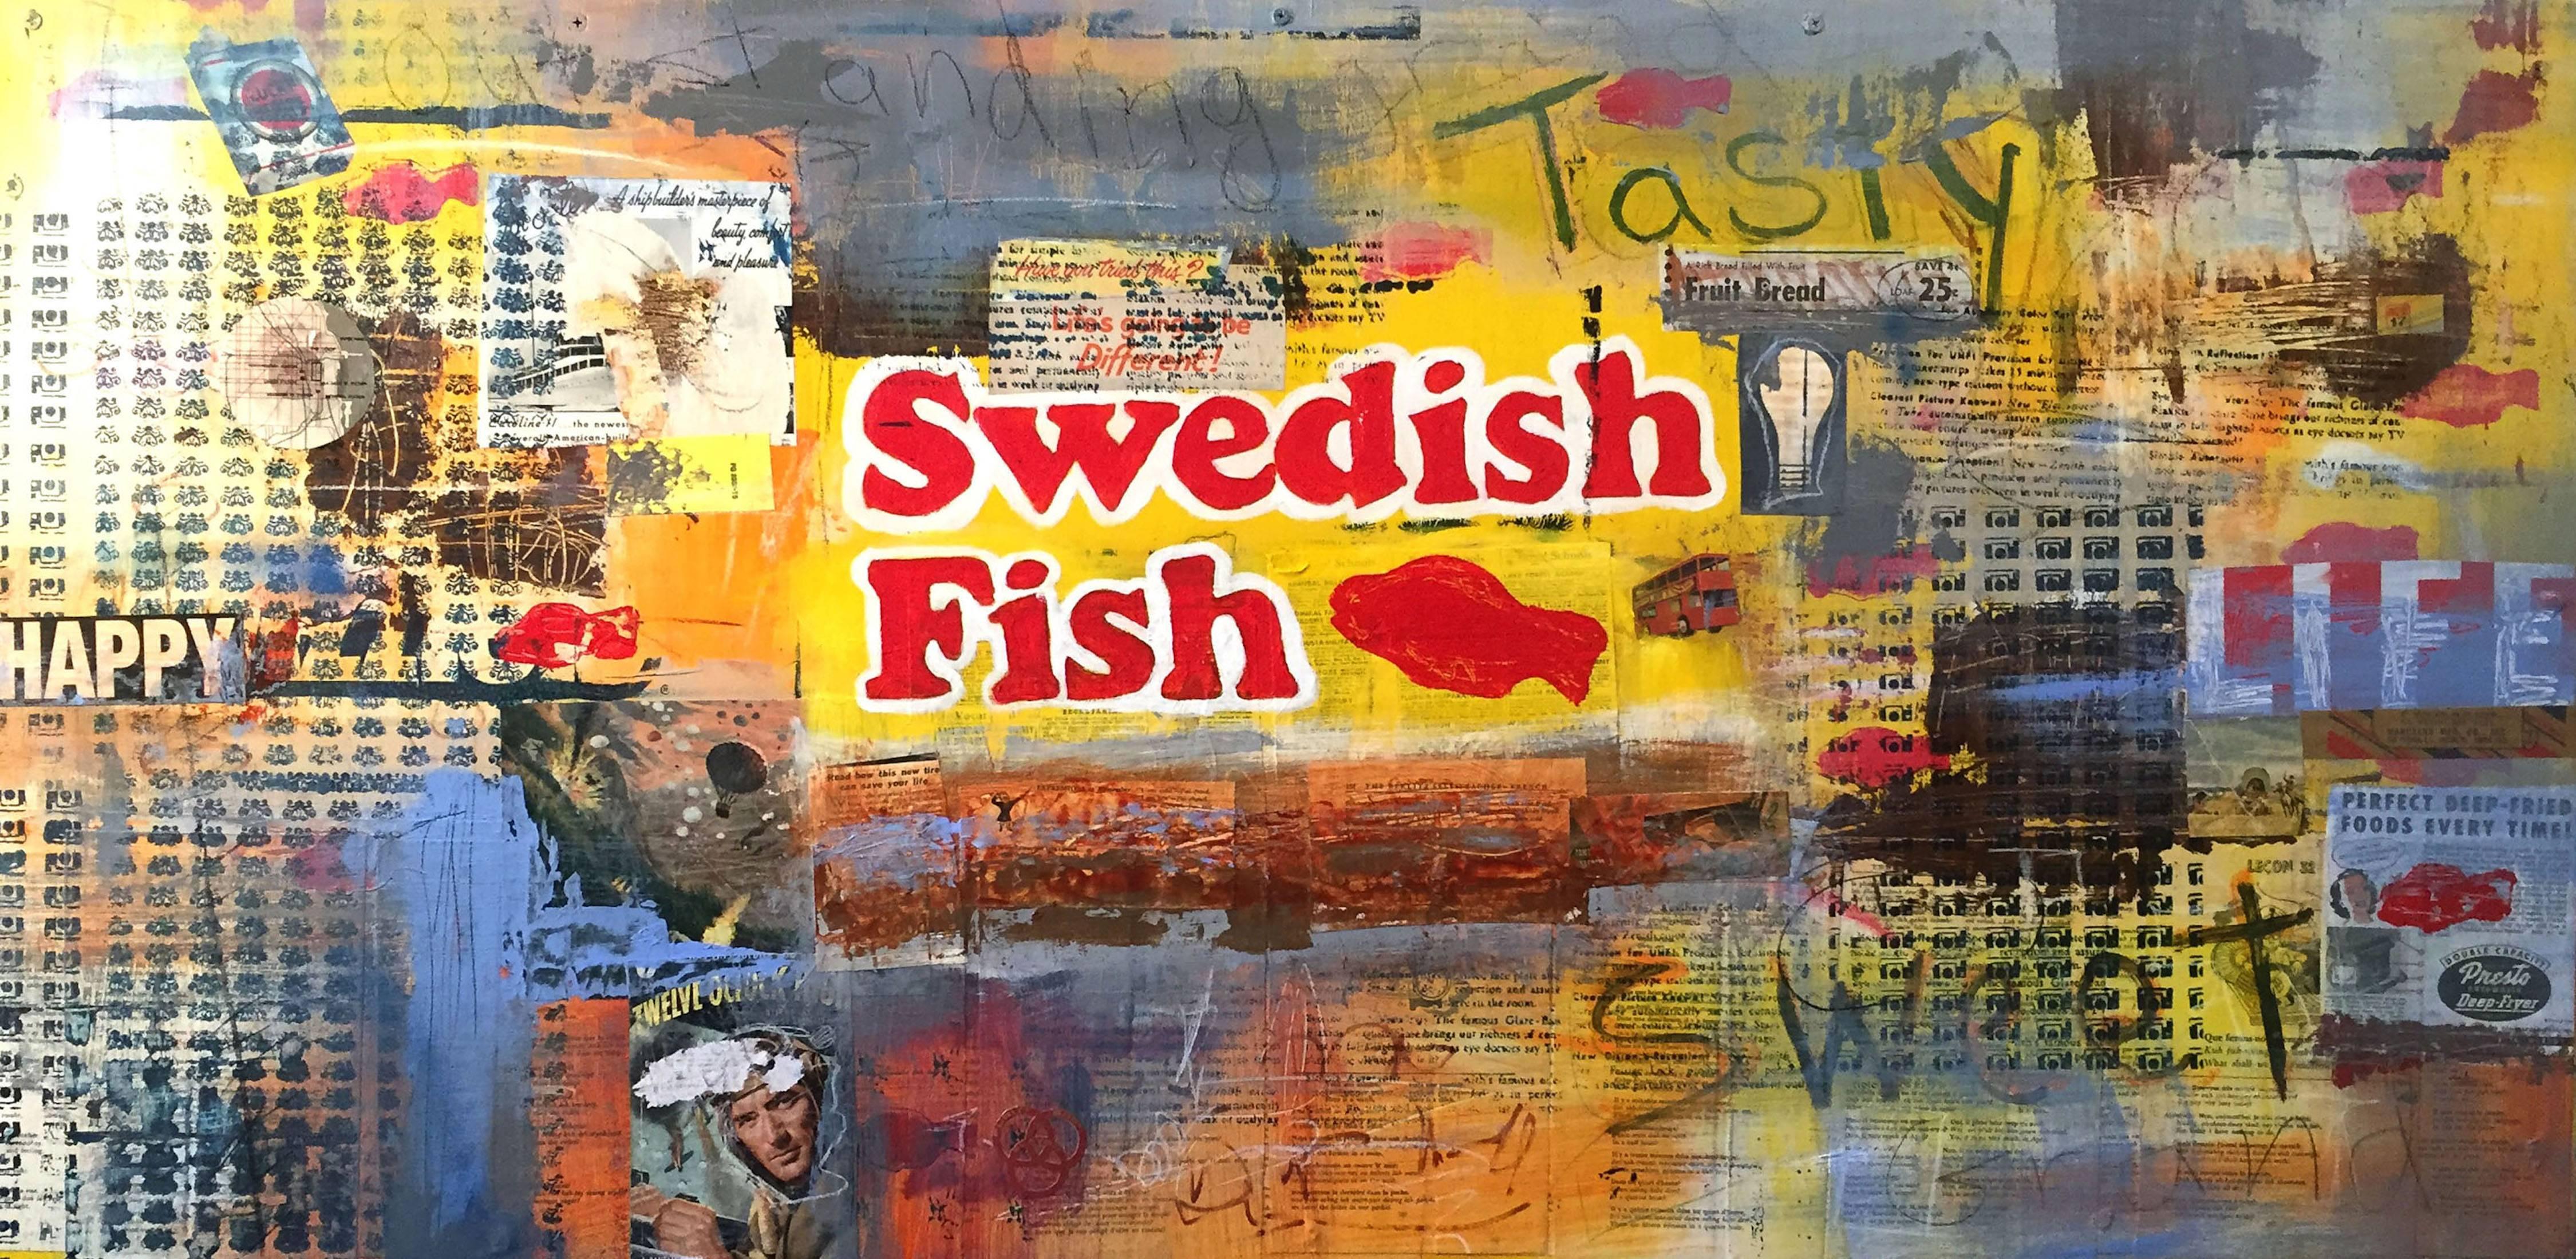 Swedish Fish - SOLD - Commission Available - Mixed Media Art by David Morico